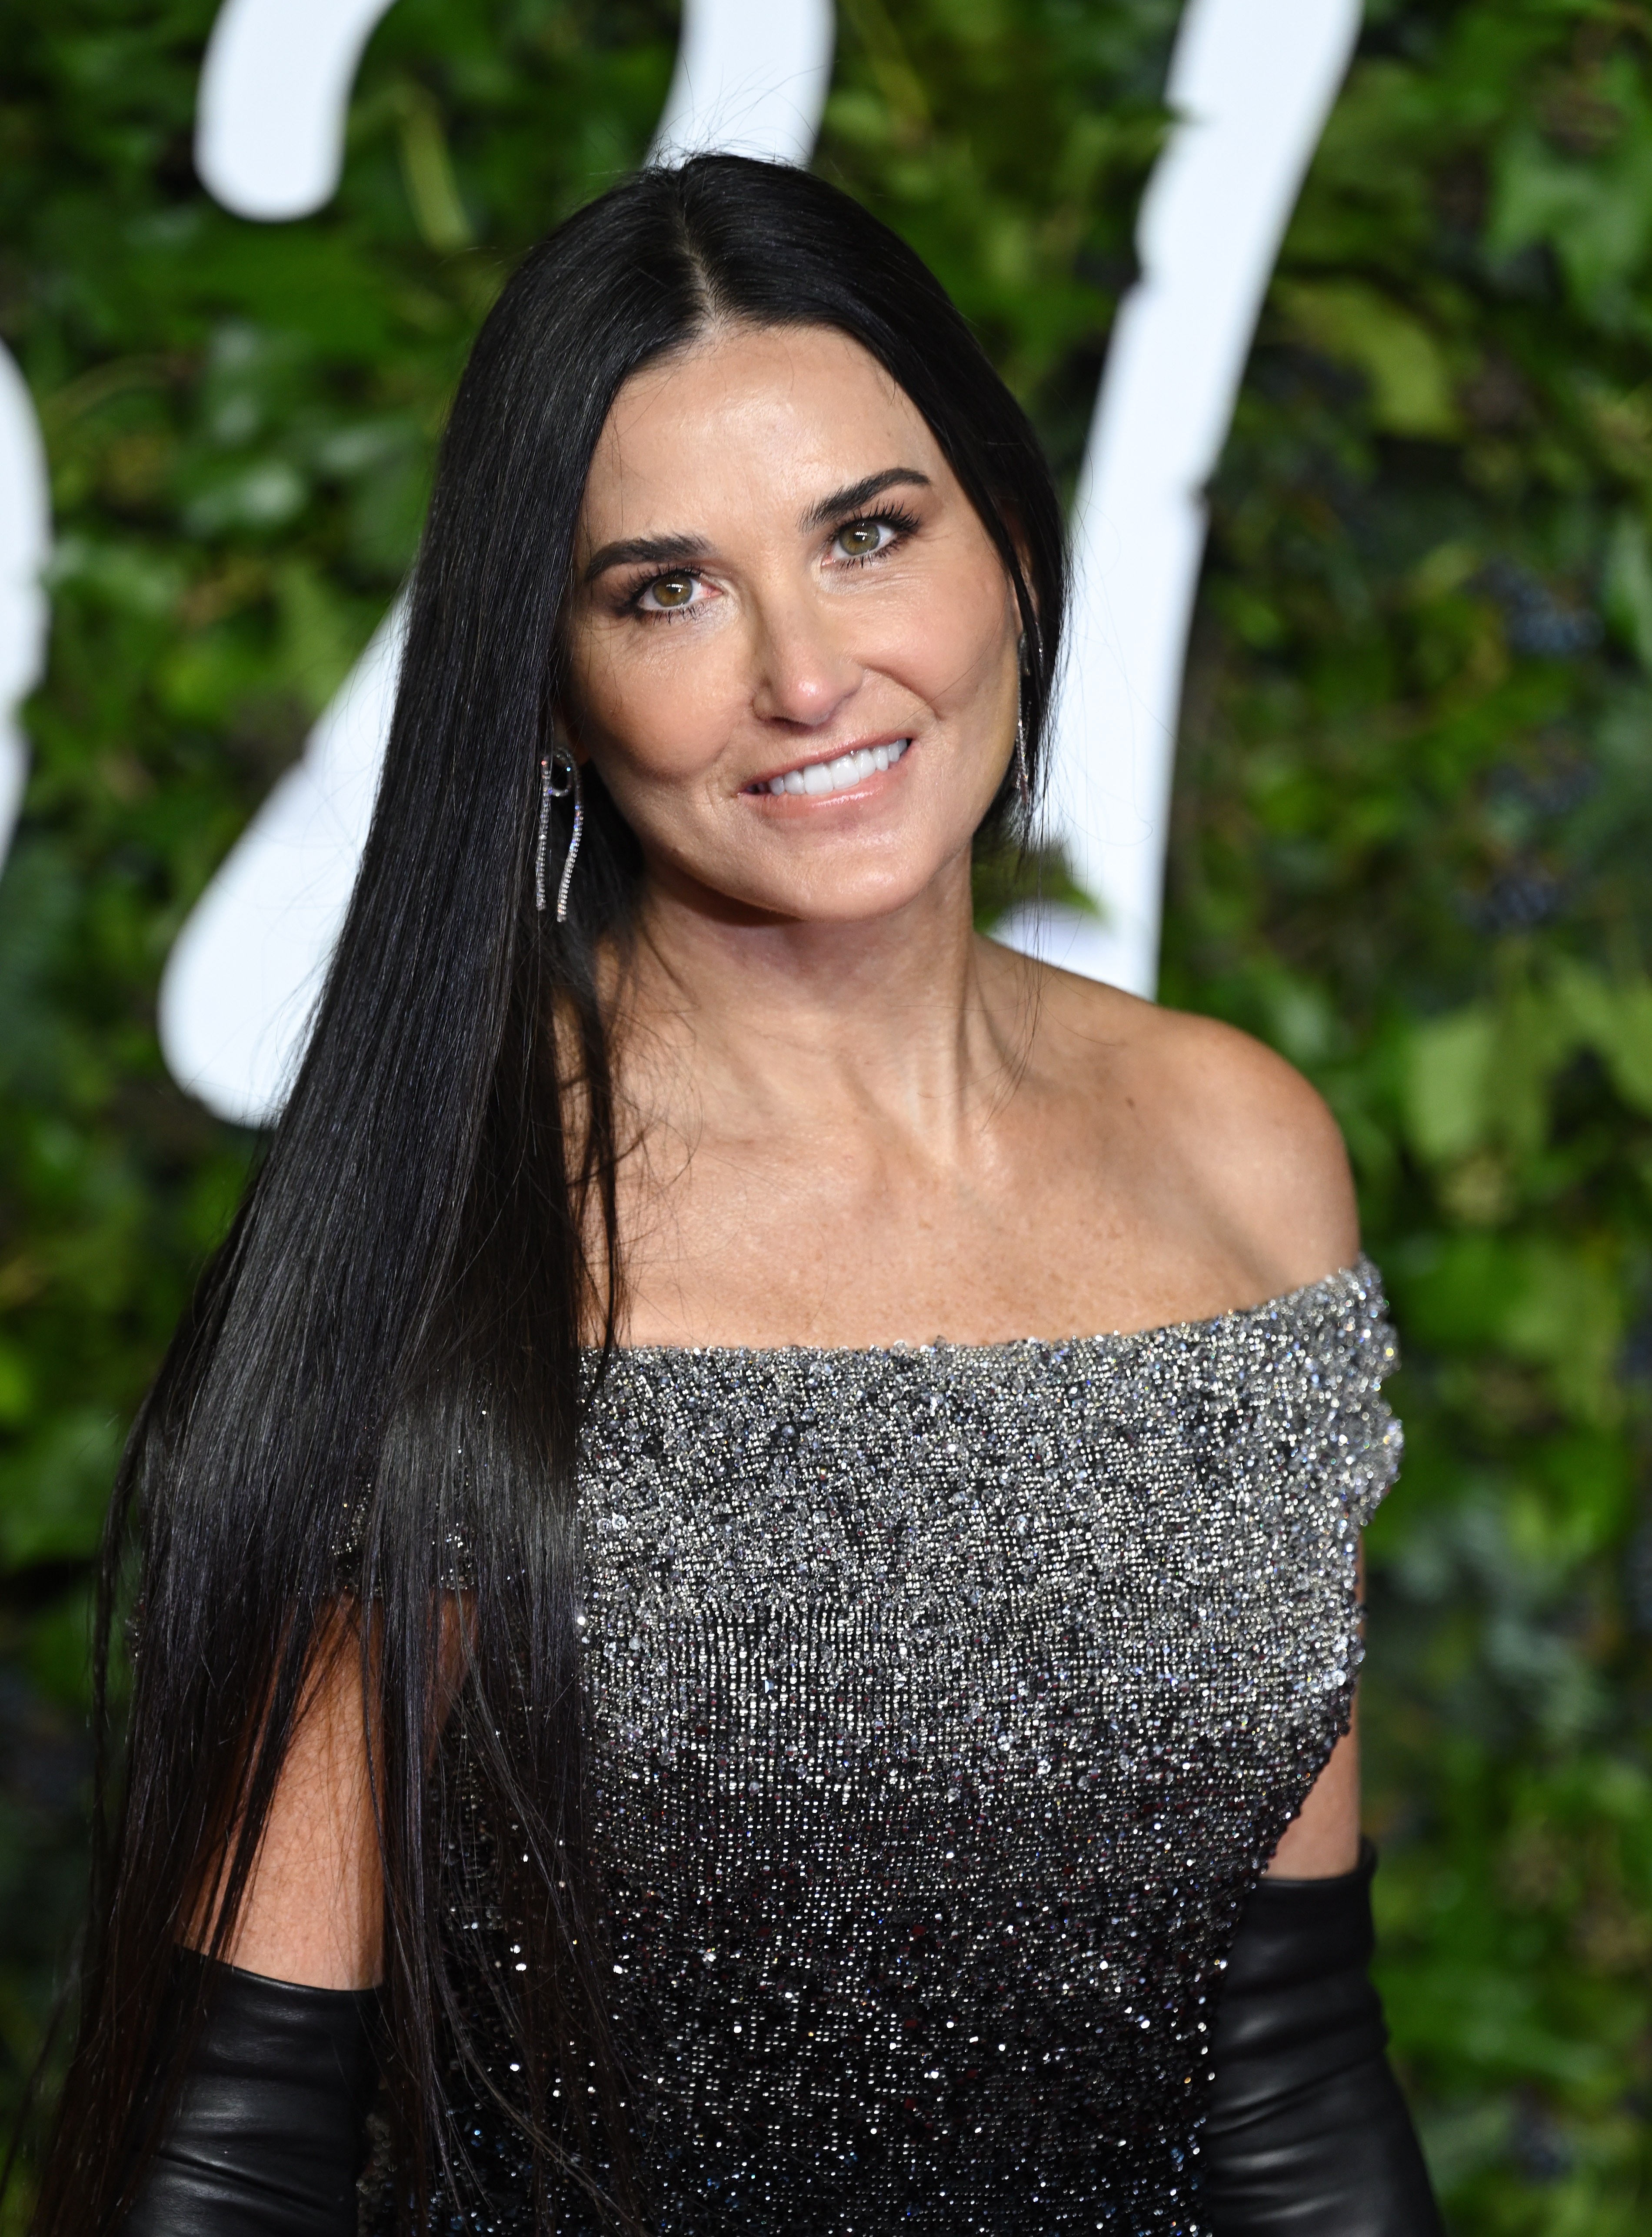 Demi Moore in der Royal Albert Hall am 29. November 2021 in London, England. | Quelle: Getty Images